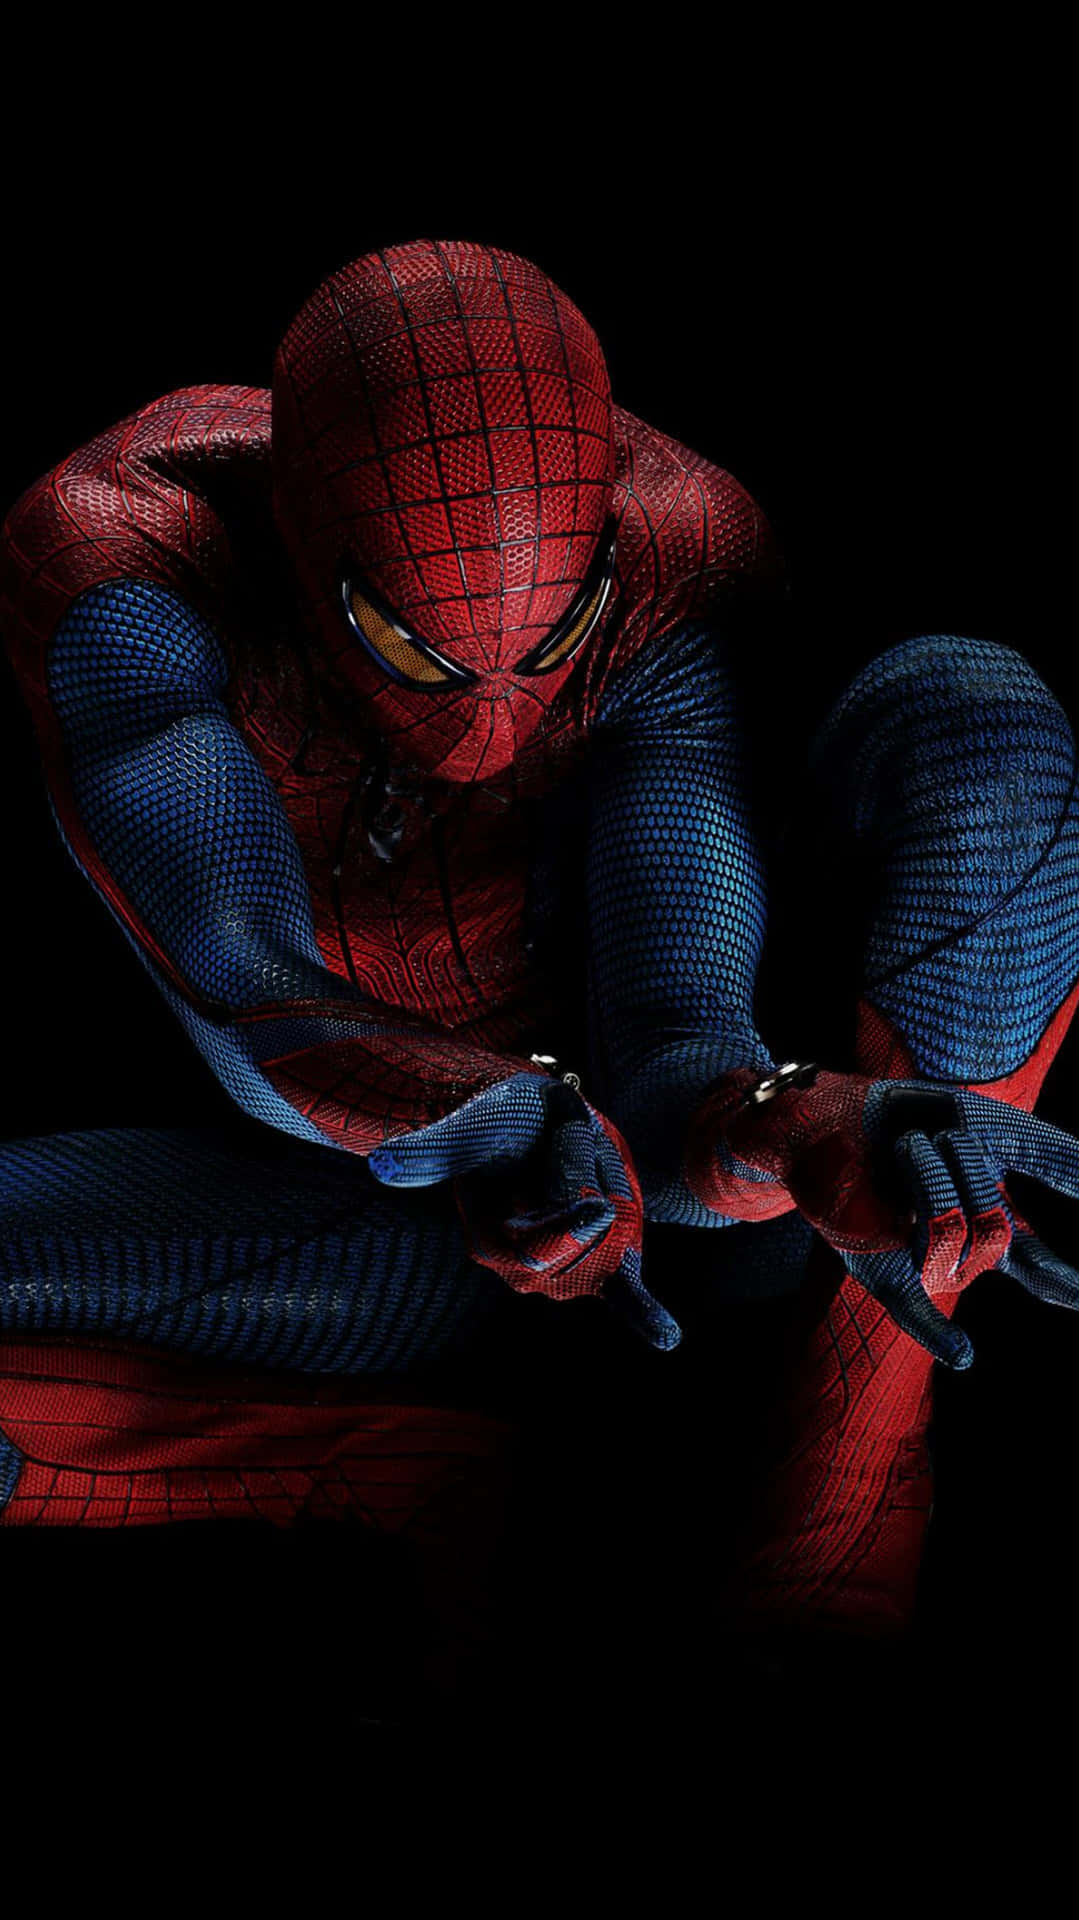 Experience the excitement of the Amazing Spider-Man with the iPhone Wallpaper